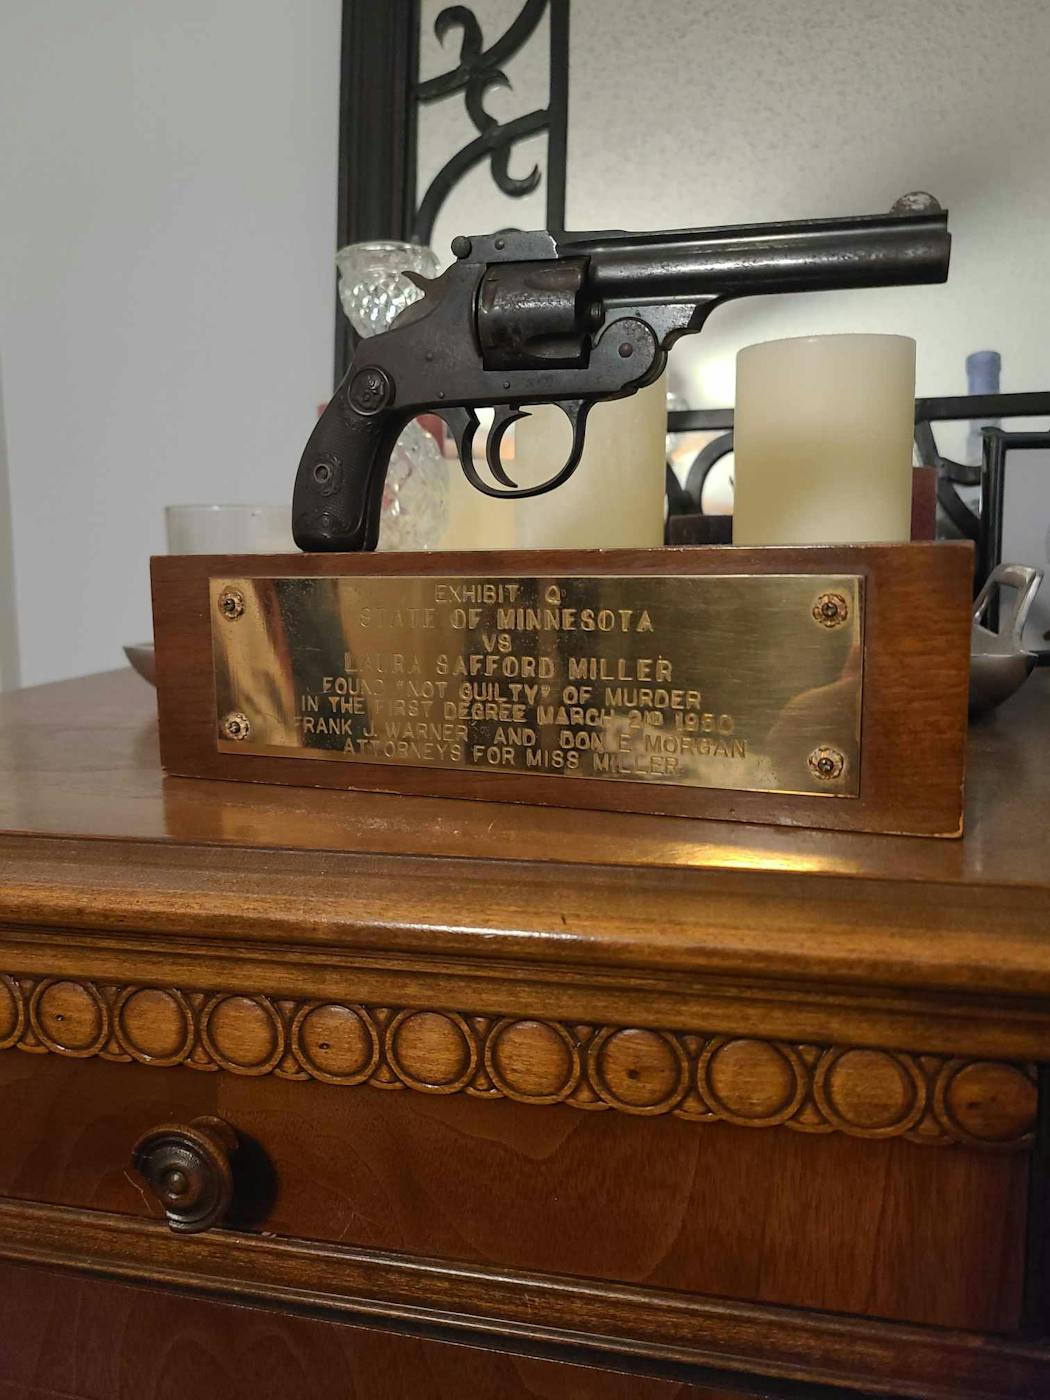 The gun trophy that Jim Nelson inherited from his mother, Jeanne. She got it from her father, Frank Warner, who defended Laura Miller in her murder trial.